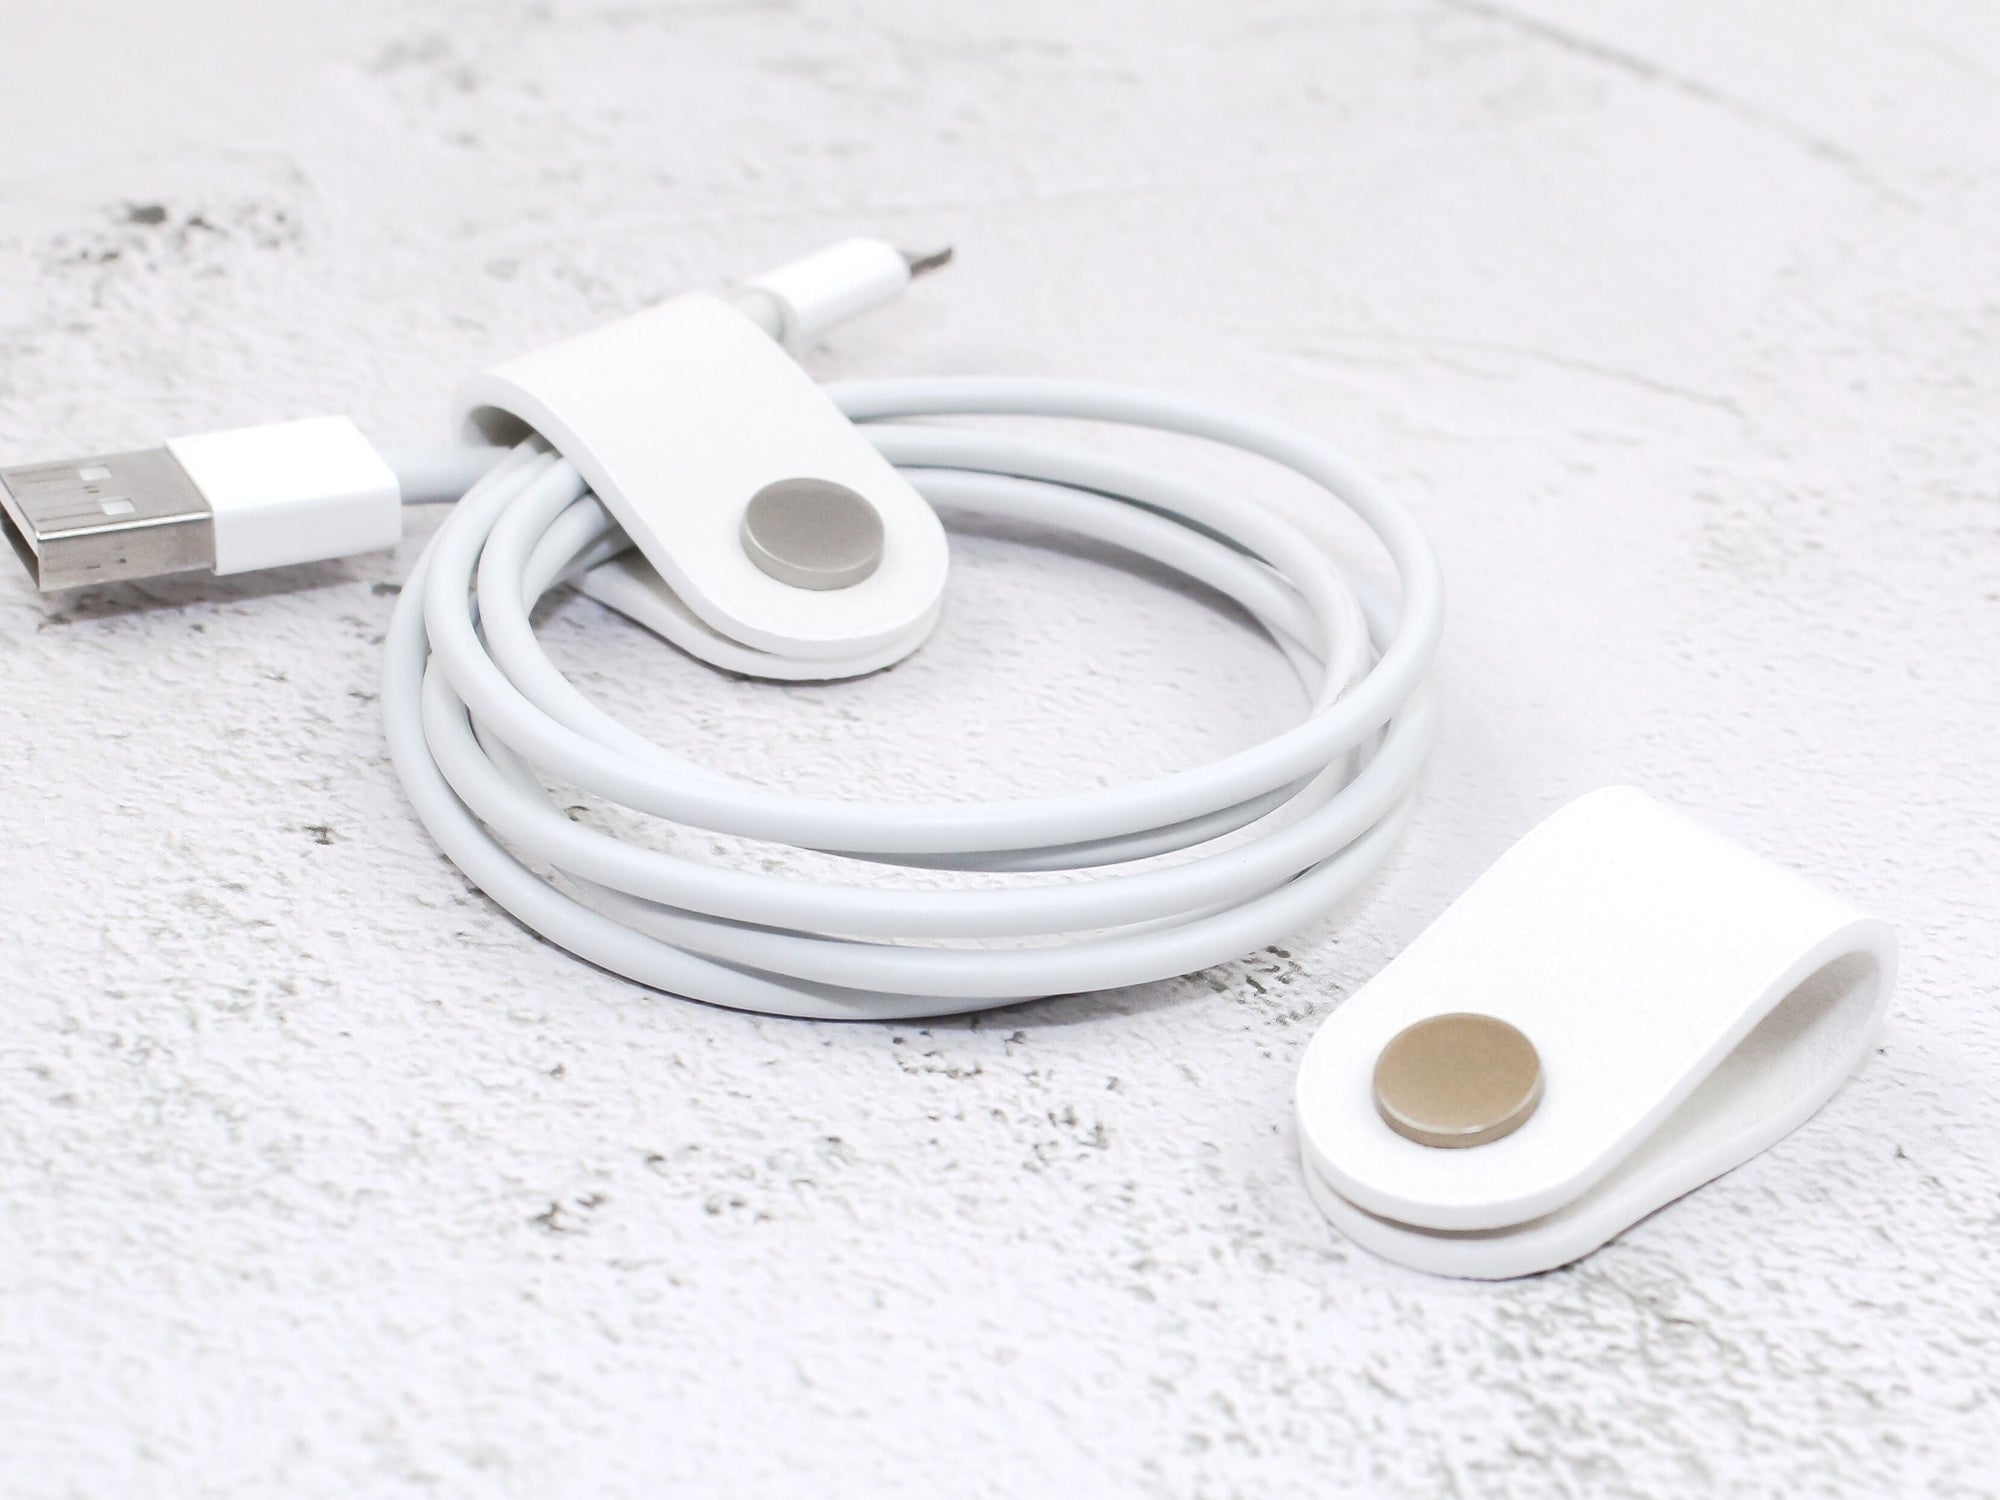 Set of 2 Cord Organiser Wraps | Cable Tidies | White Textured Faux Leather